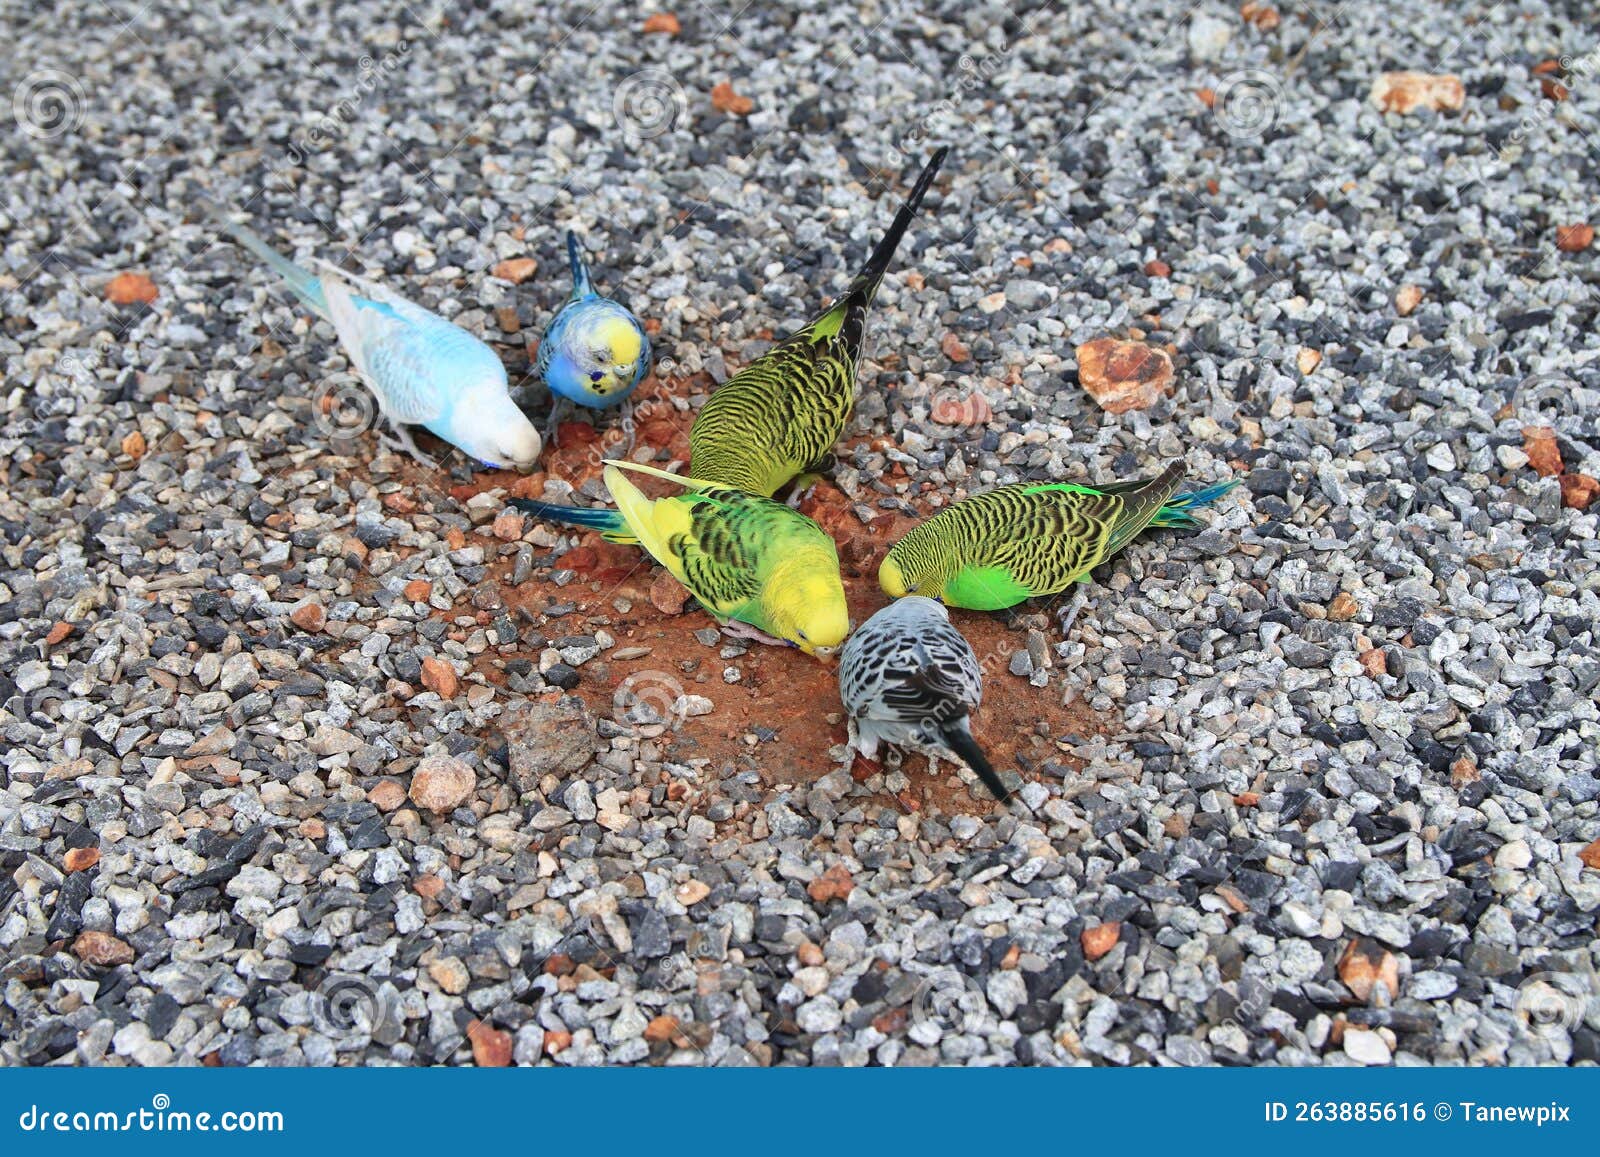 colorful budgies peck and eat on the floor